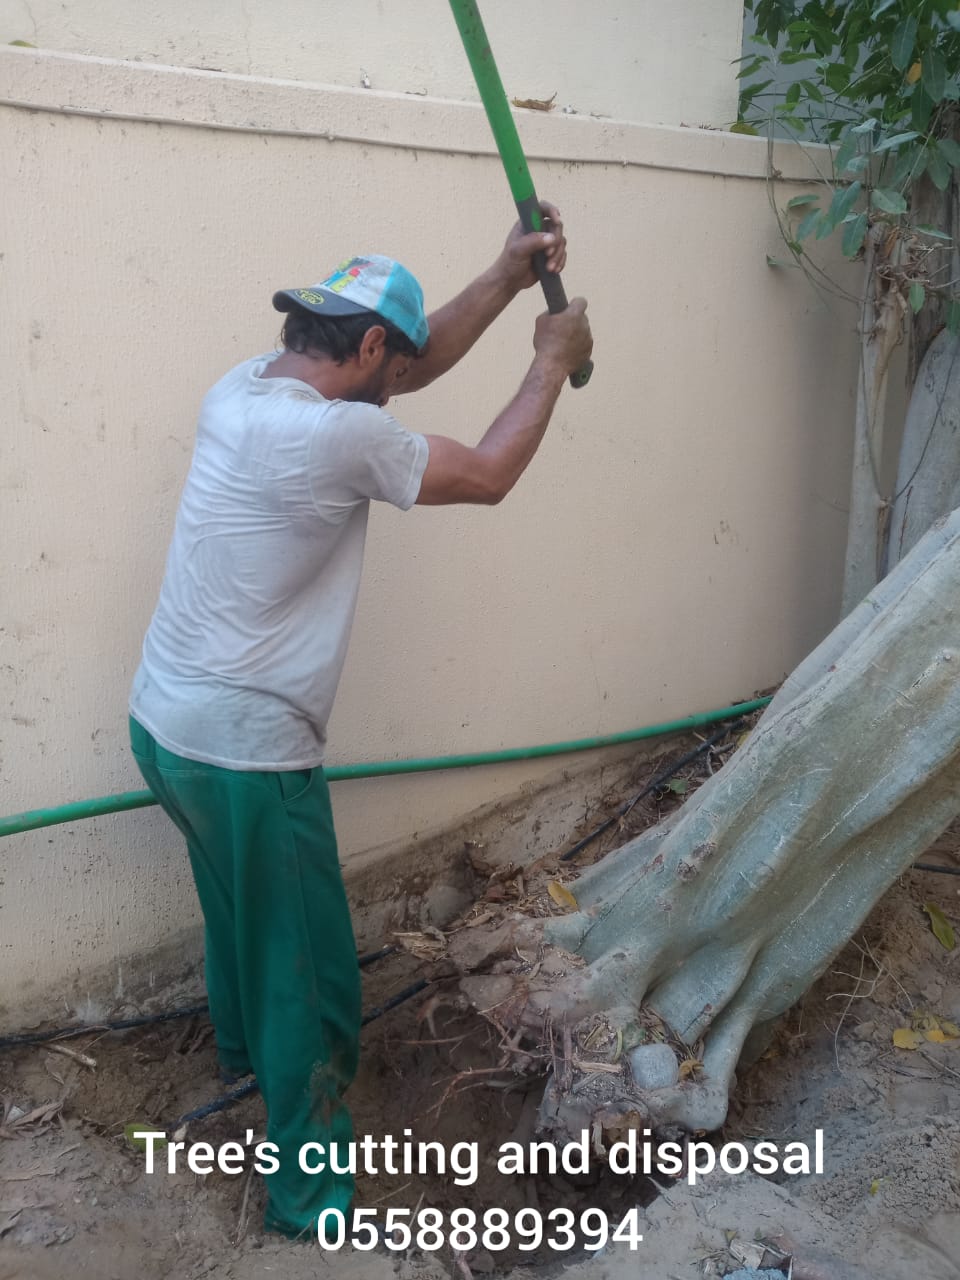 TREE CUTTING AND DISPOSAL SERVICE